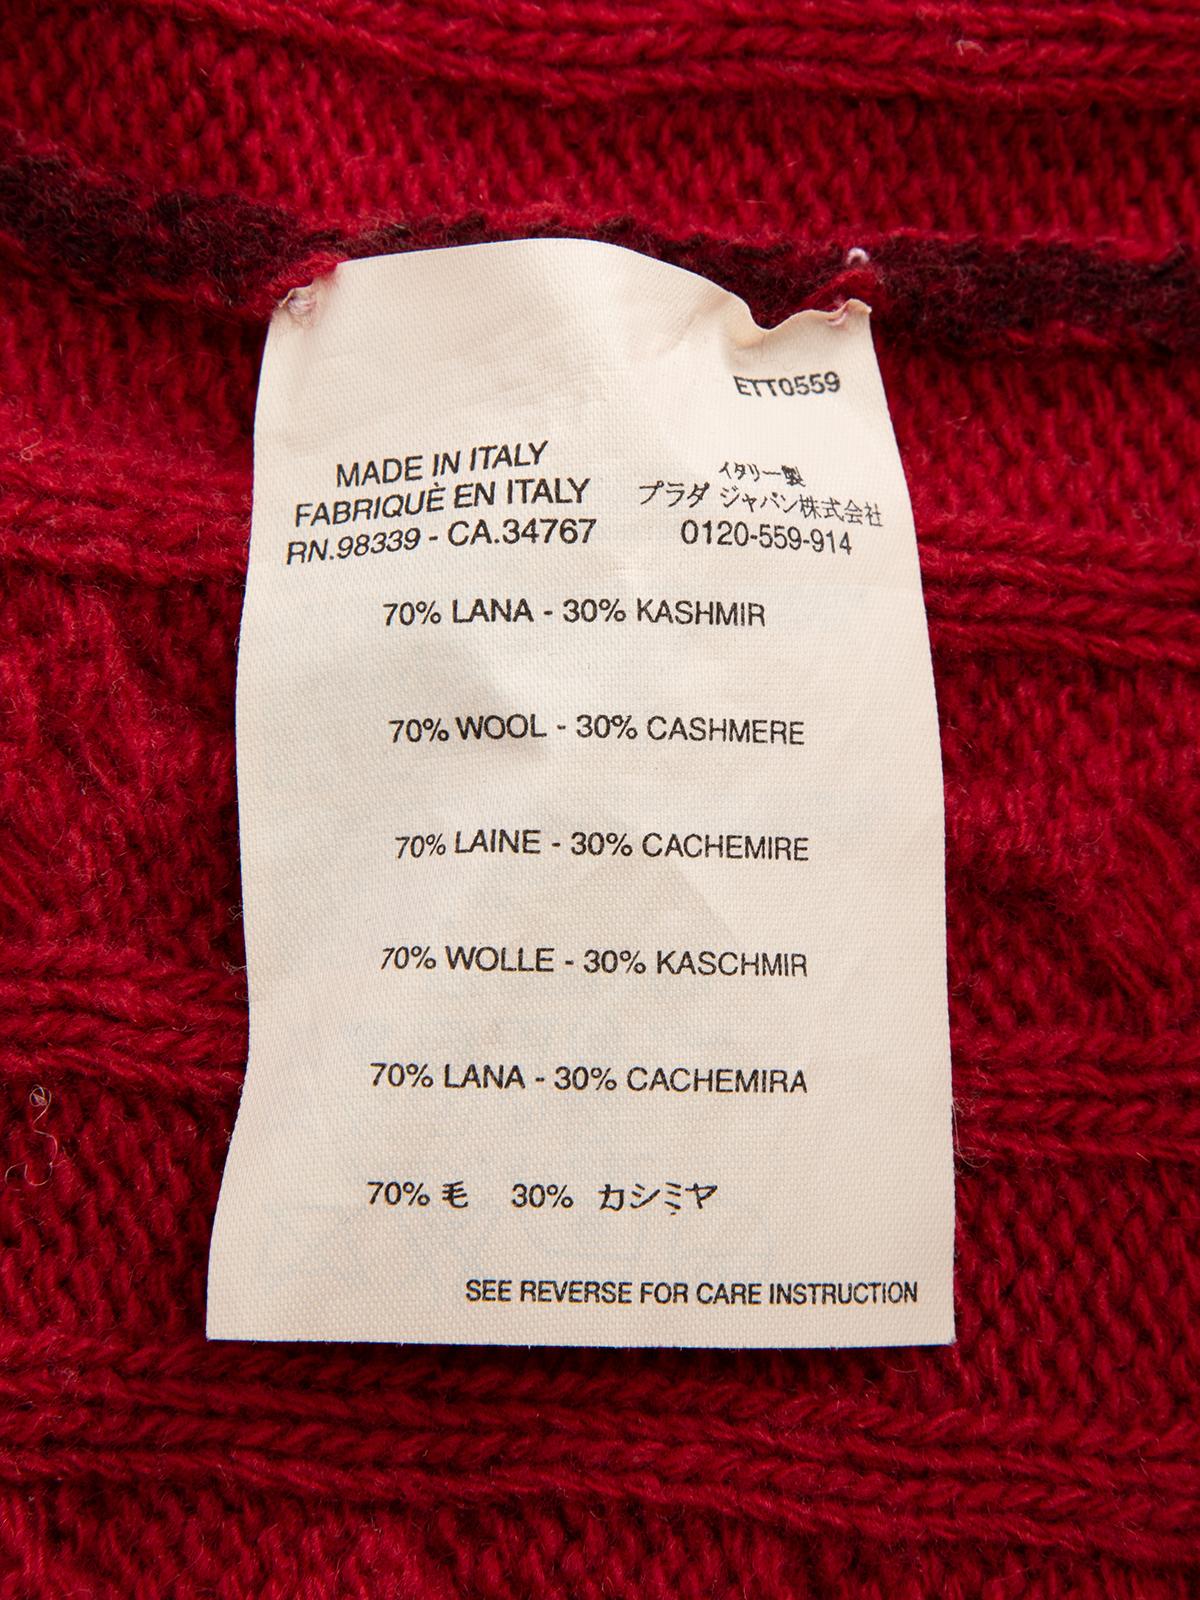 Pre-Loved Prada Women's Burgundy Cable Knit Cardigan For Sale 1